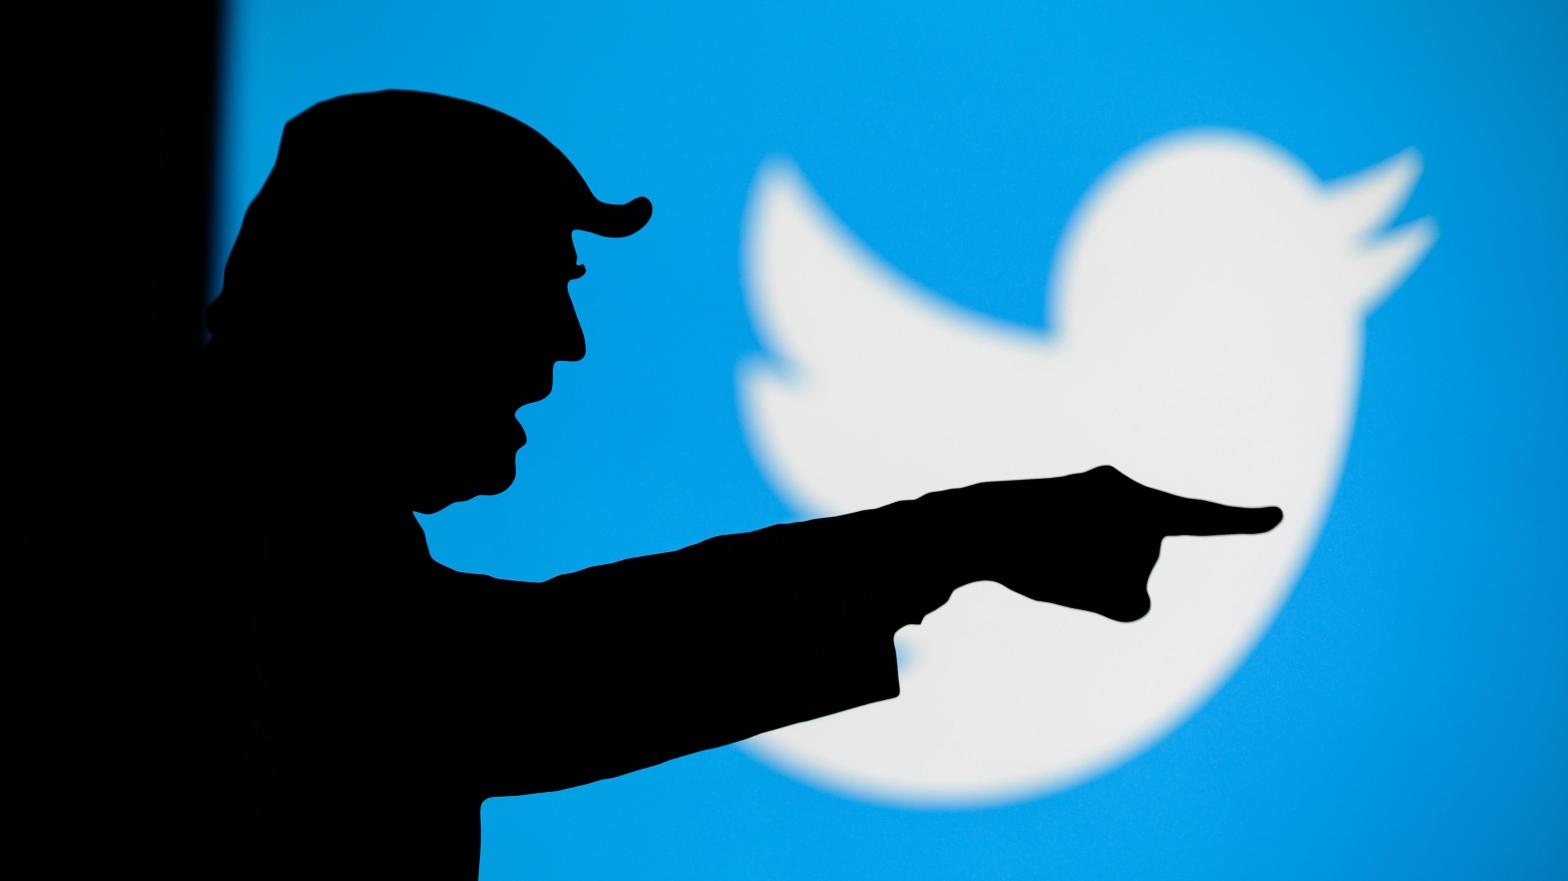 Donald Trump's account was recently unbanned on Twitter, though he's been restricted in posting due to an ongoing deal with his company Truth Social. (Image: kovop, Shutterstock)